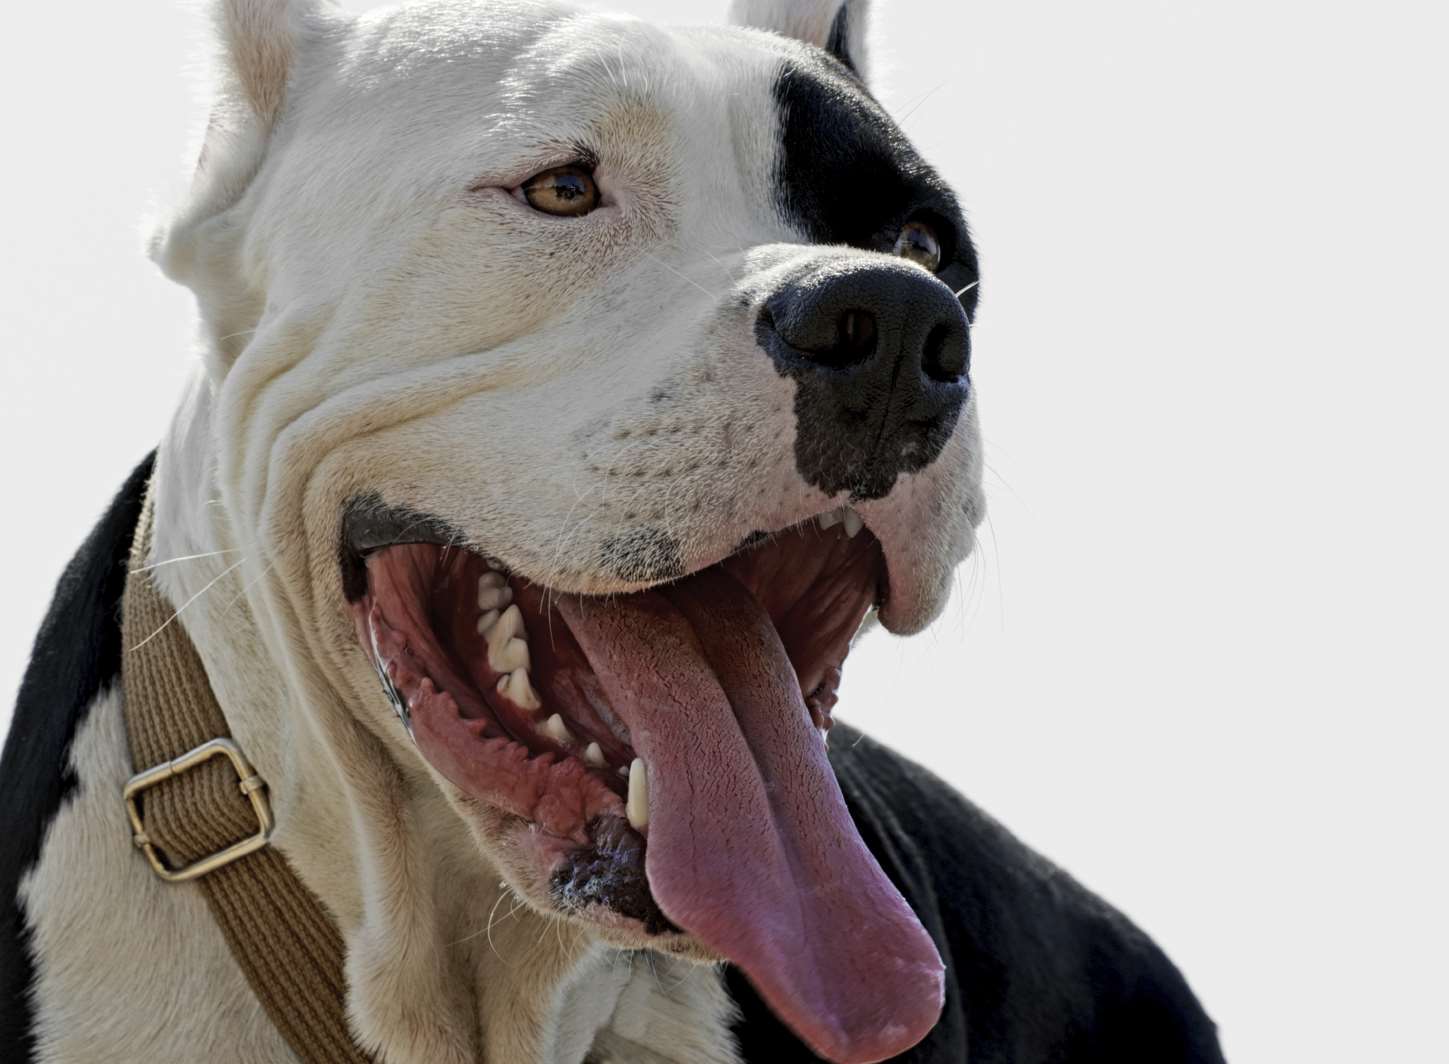 A pitbull similar to the one involved in the attack. Stock image.